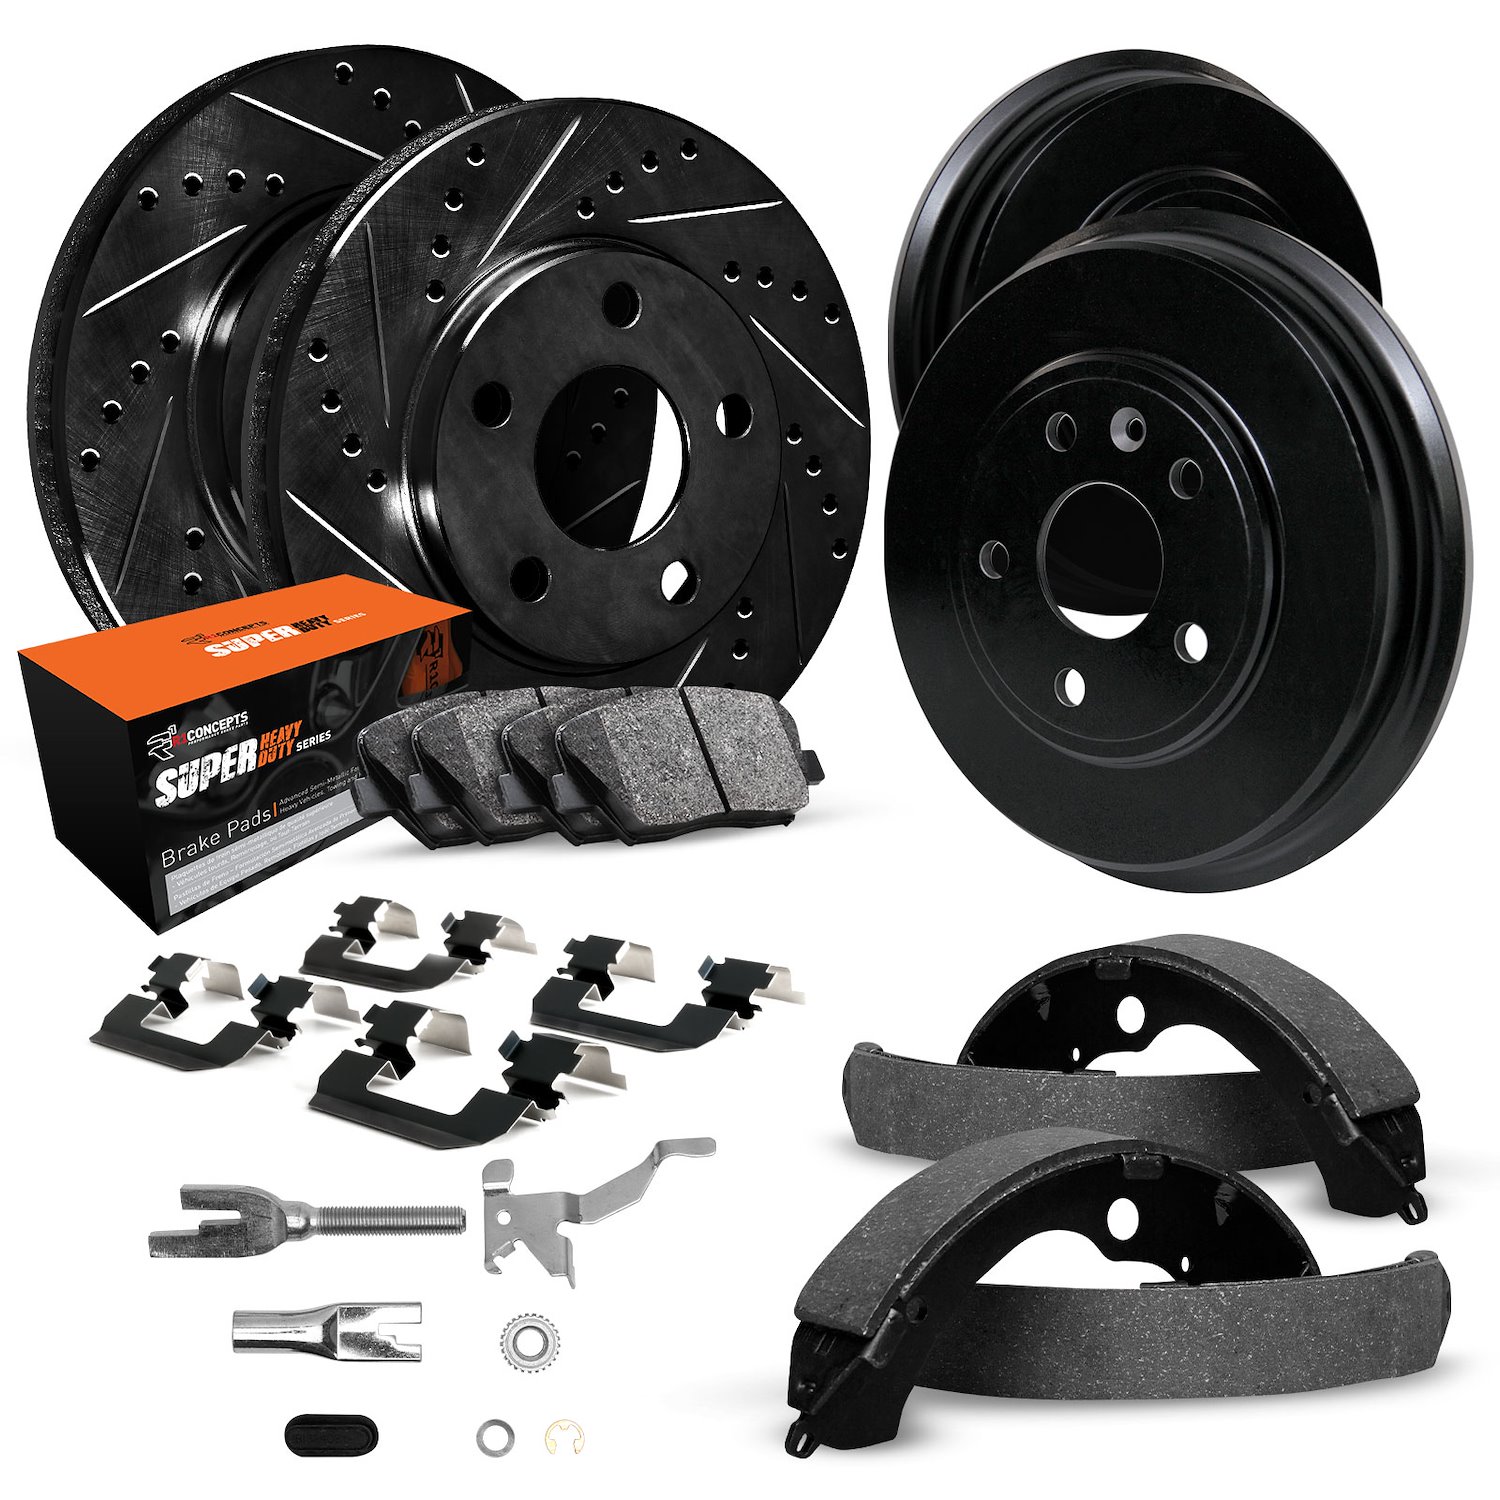 E-Line Drilled/Slotted Black Rotor & Drum Set w/Super-Duty Pads, Shoes, Hardware/Adjusters, 1988-1989 GM